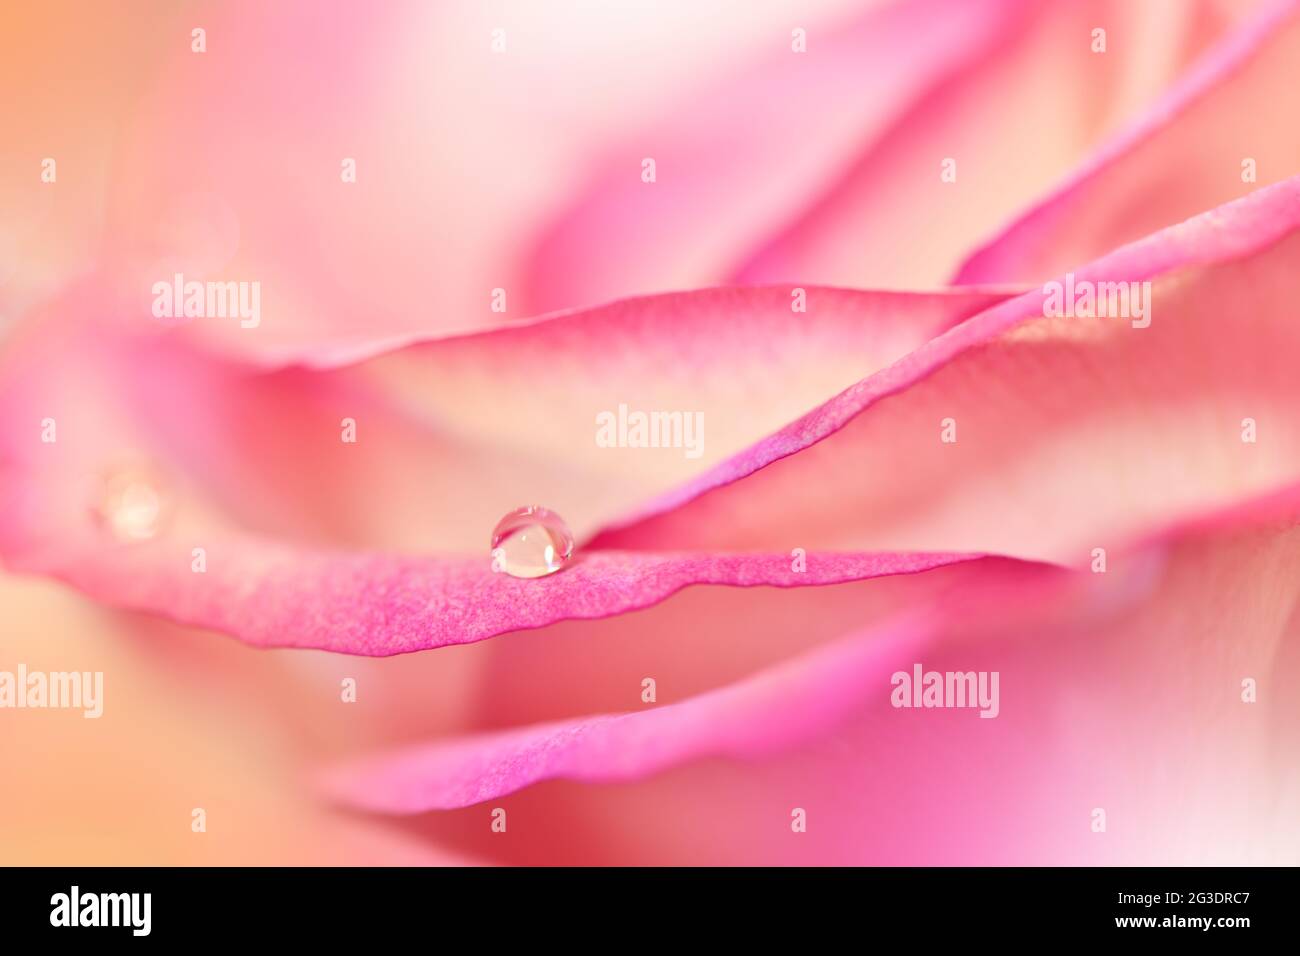 Beautiful Nature Background.Floral Art Design.Abstract Macro Photography.Pink Rose Flower.Pastel Flowers.Violet Background.Creative Artistic Wallpaper Stock Photo